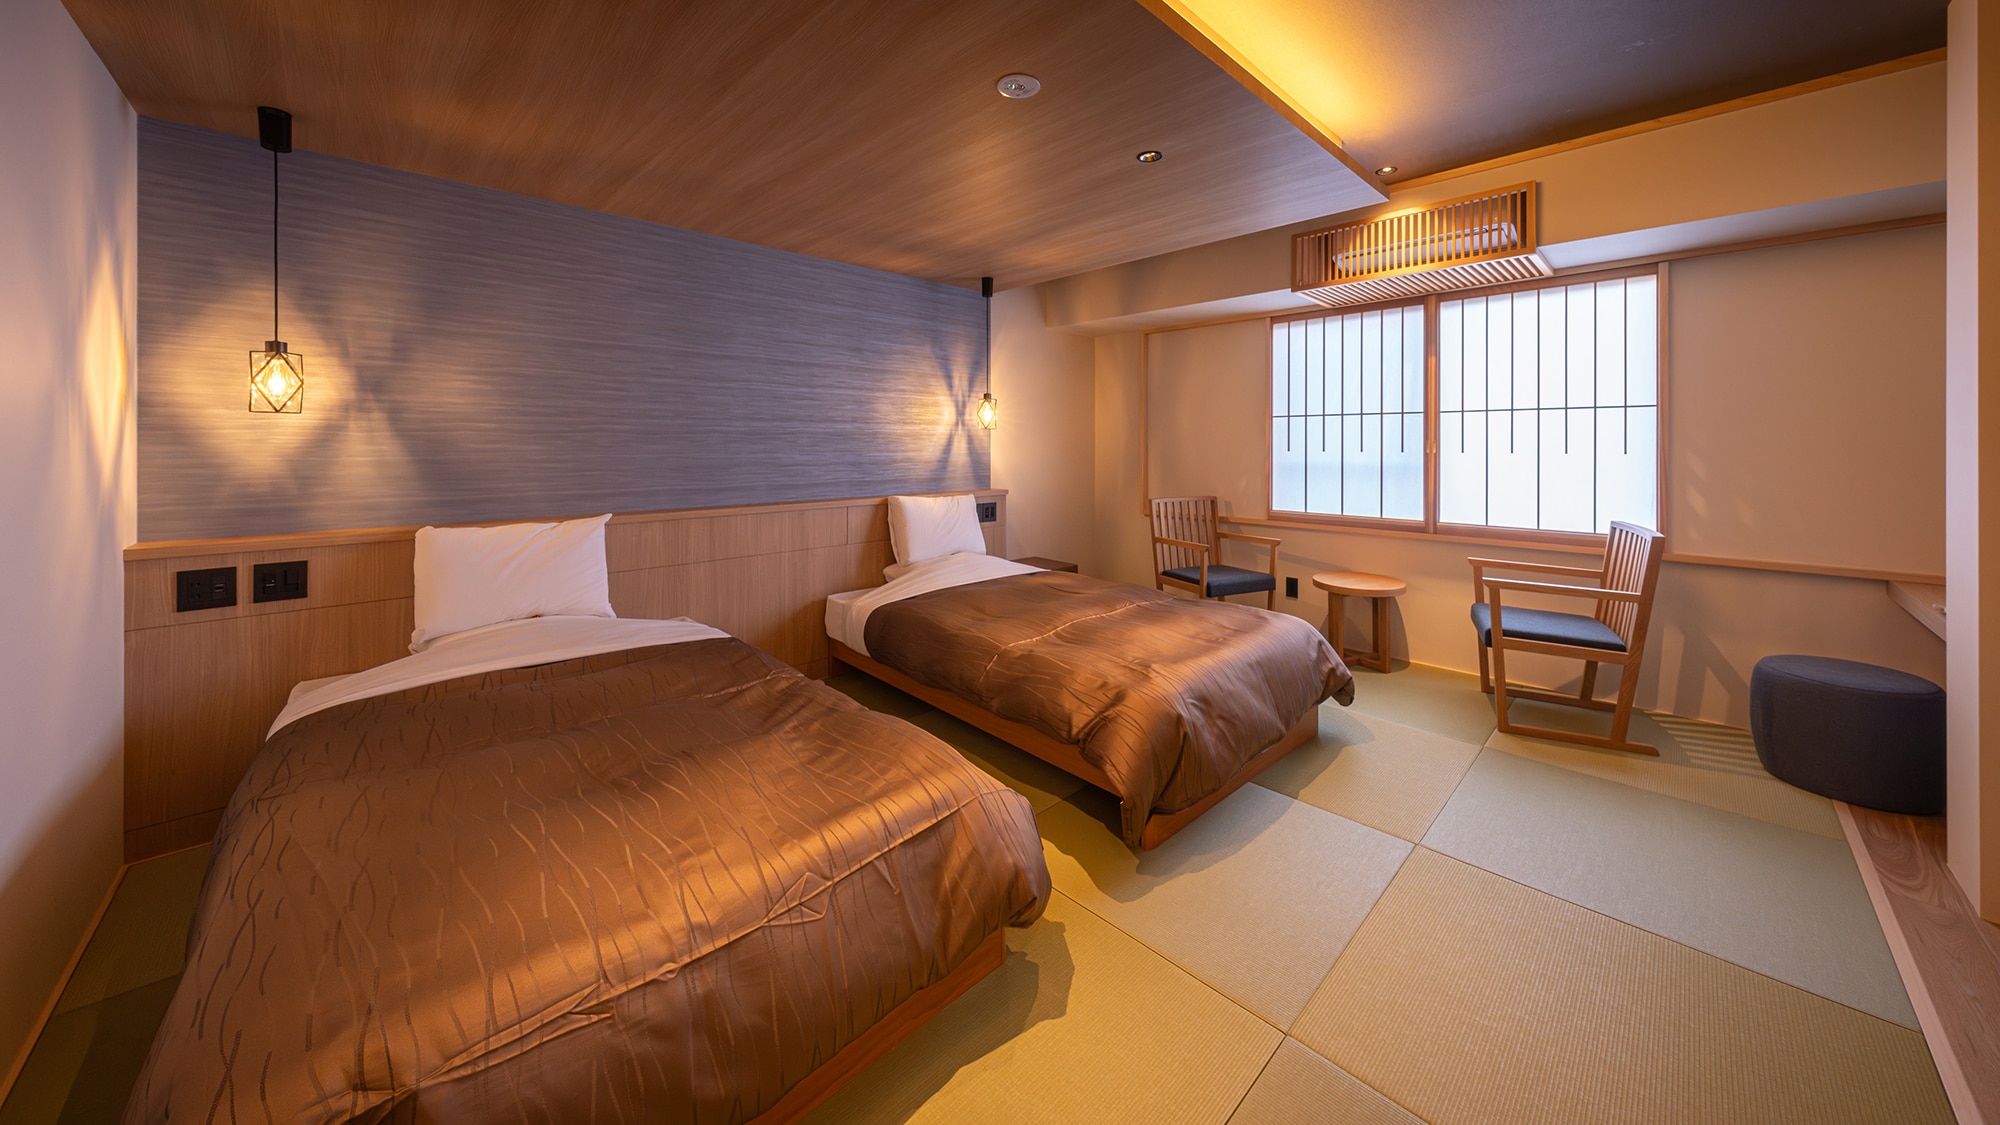 A moment of peace for the couple. Relax in a sophisticated and stylish space that retains the warmth of Japan.